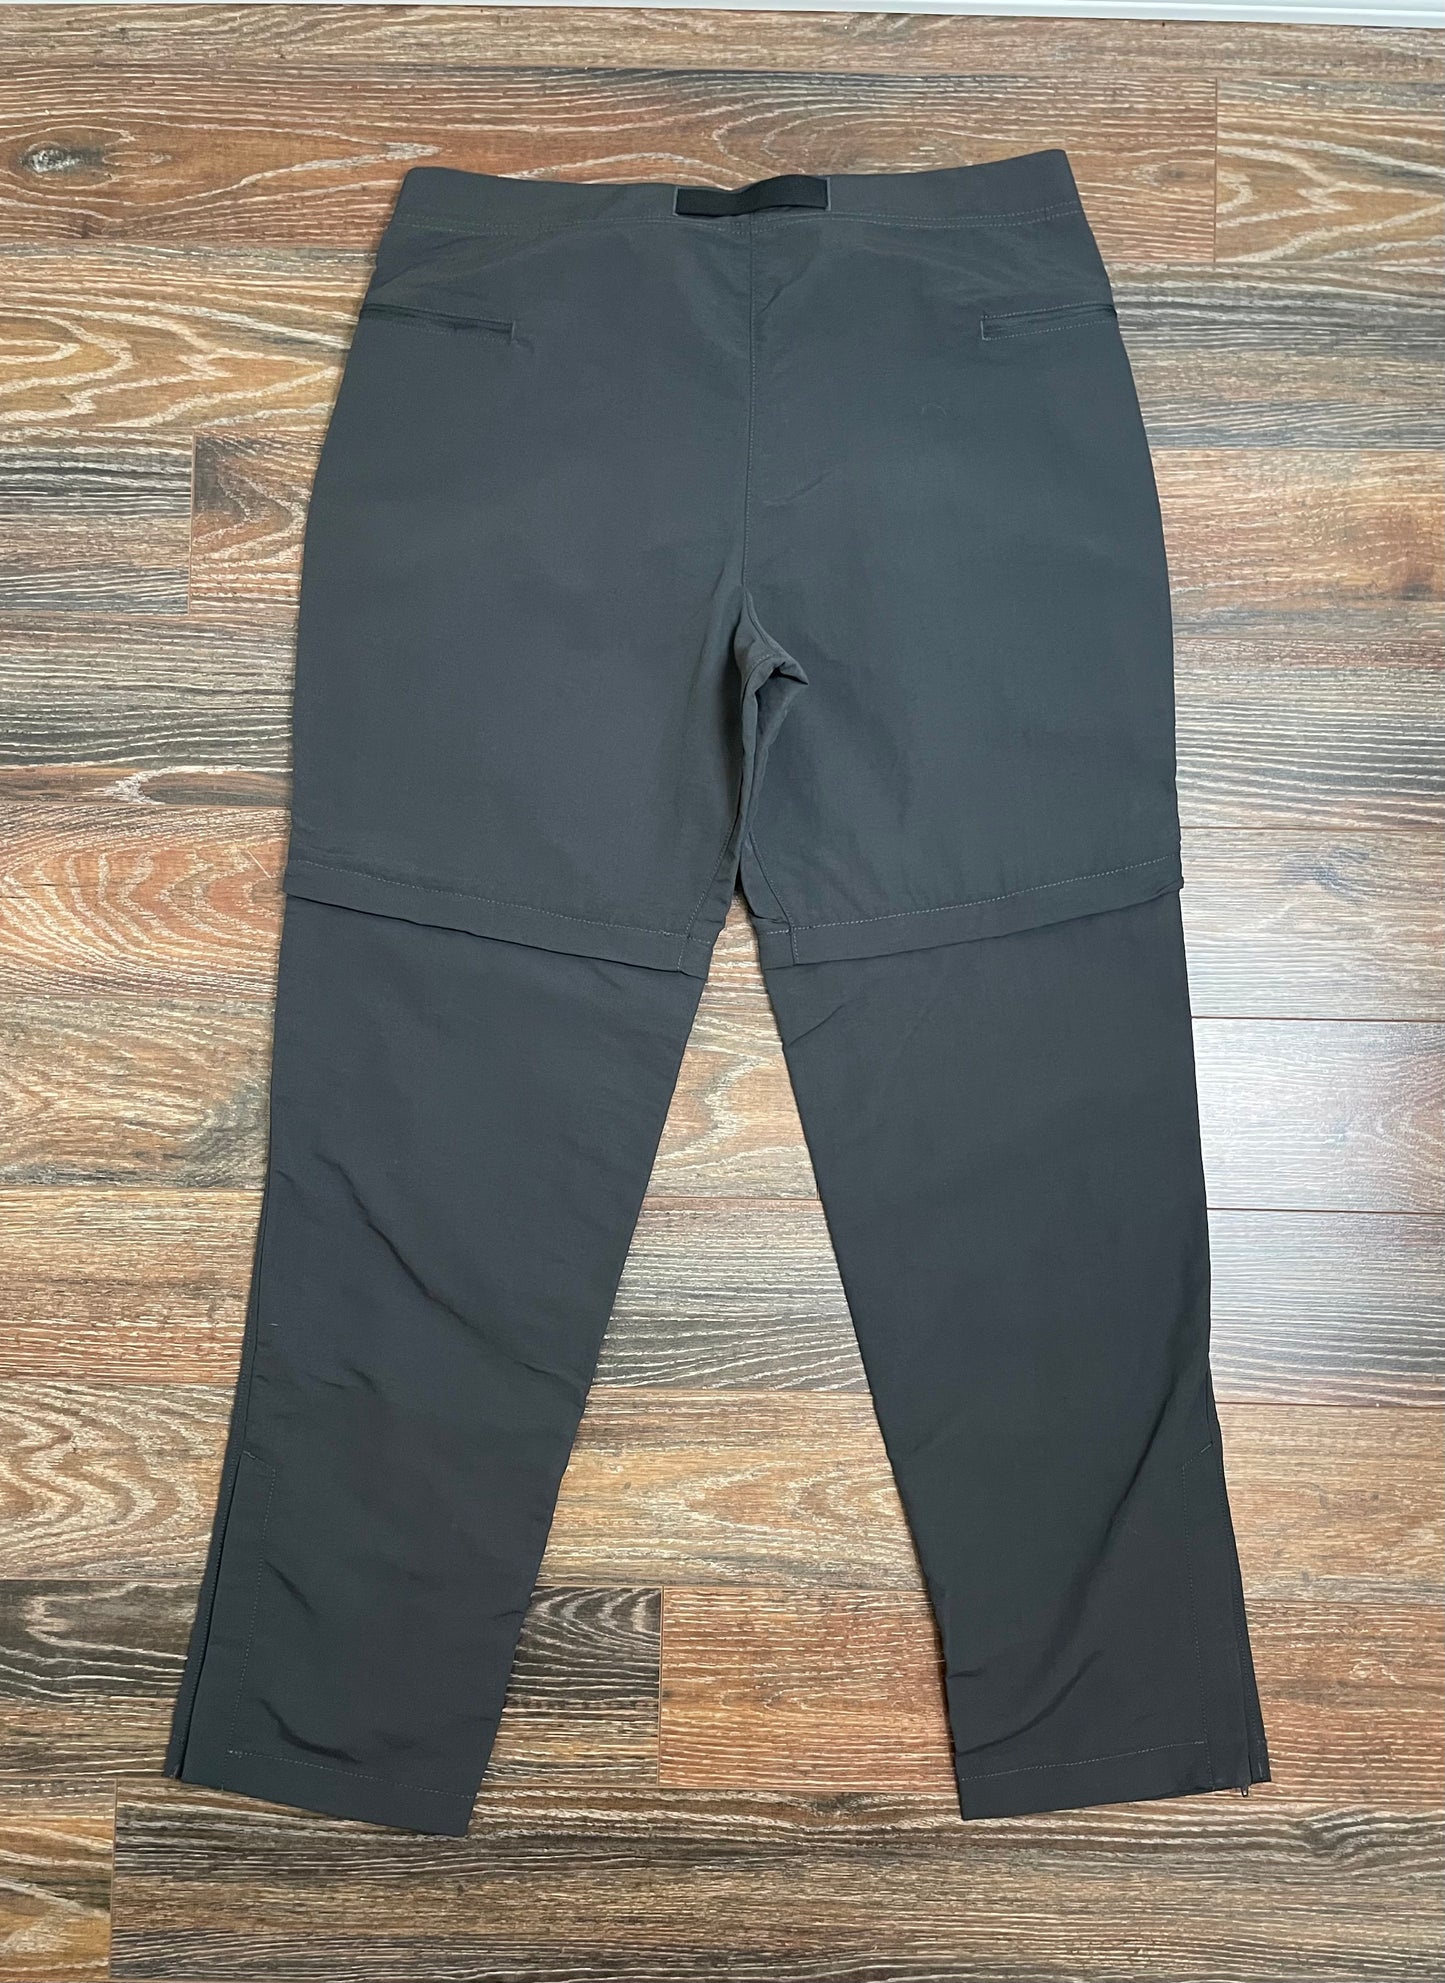 (Tags on) Men’s The North Face Paramount Trail Convertible Pant (34 Reg)